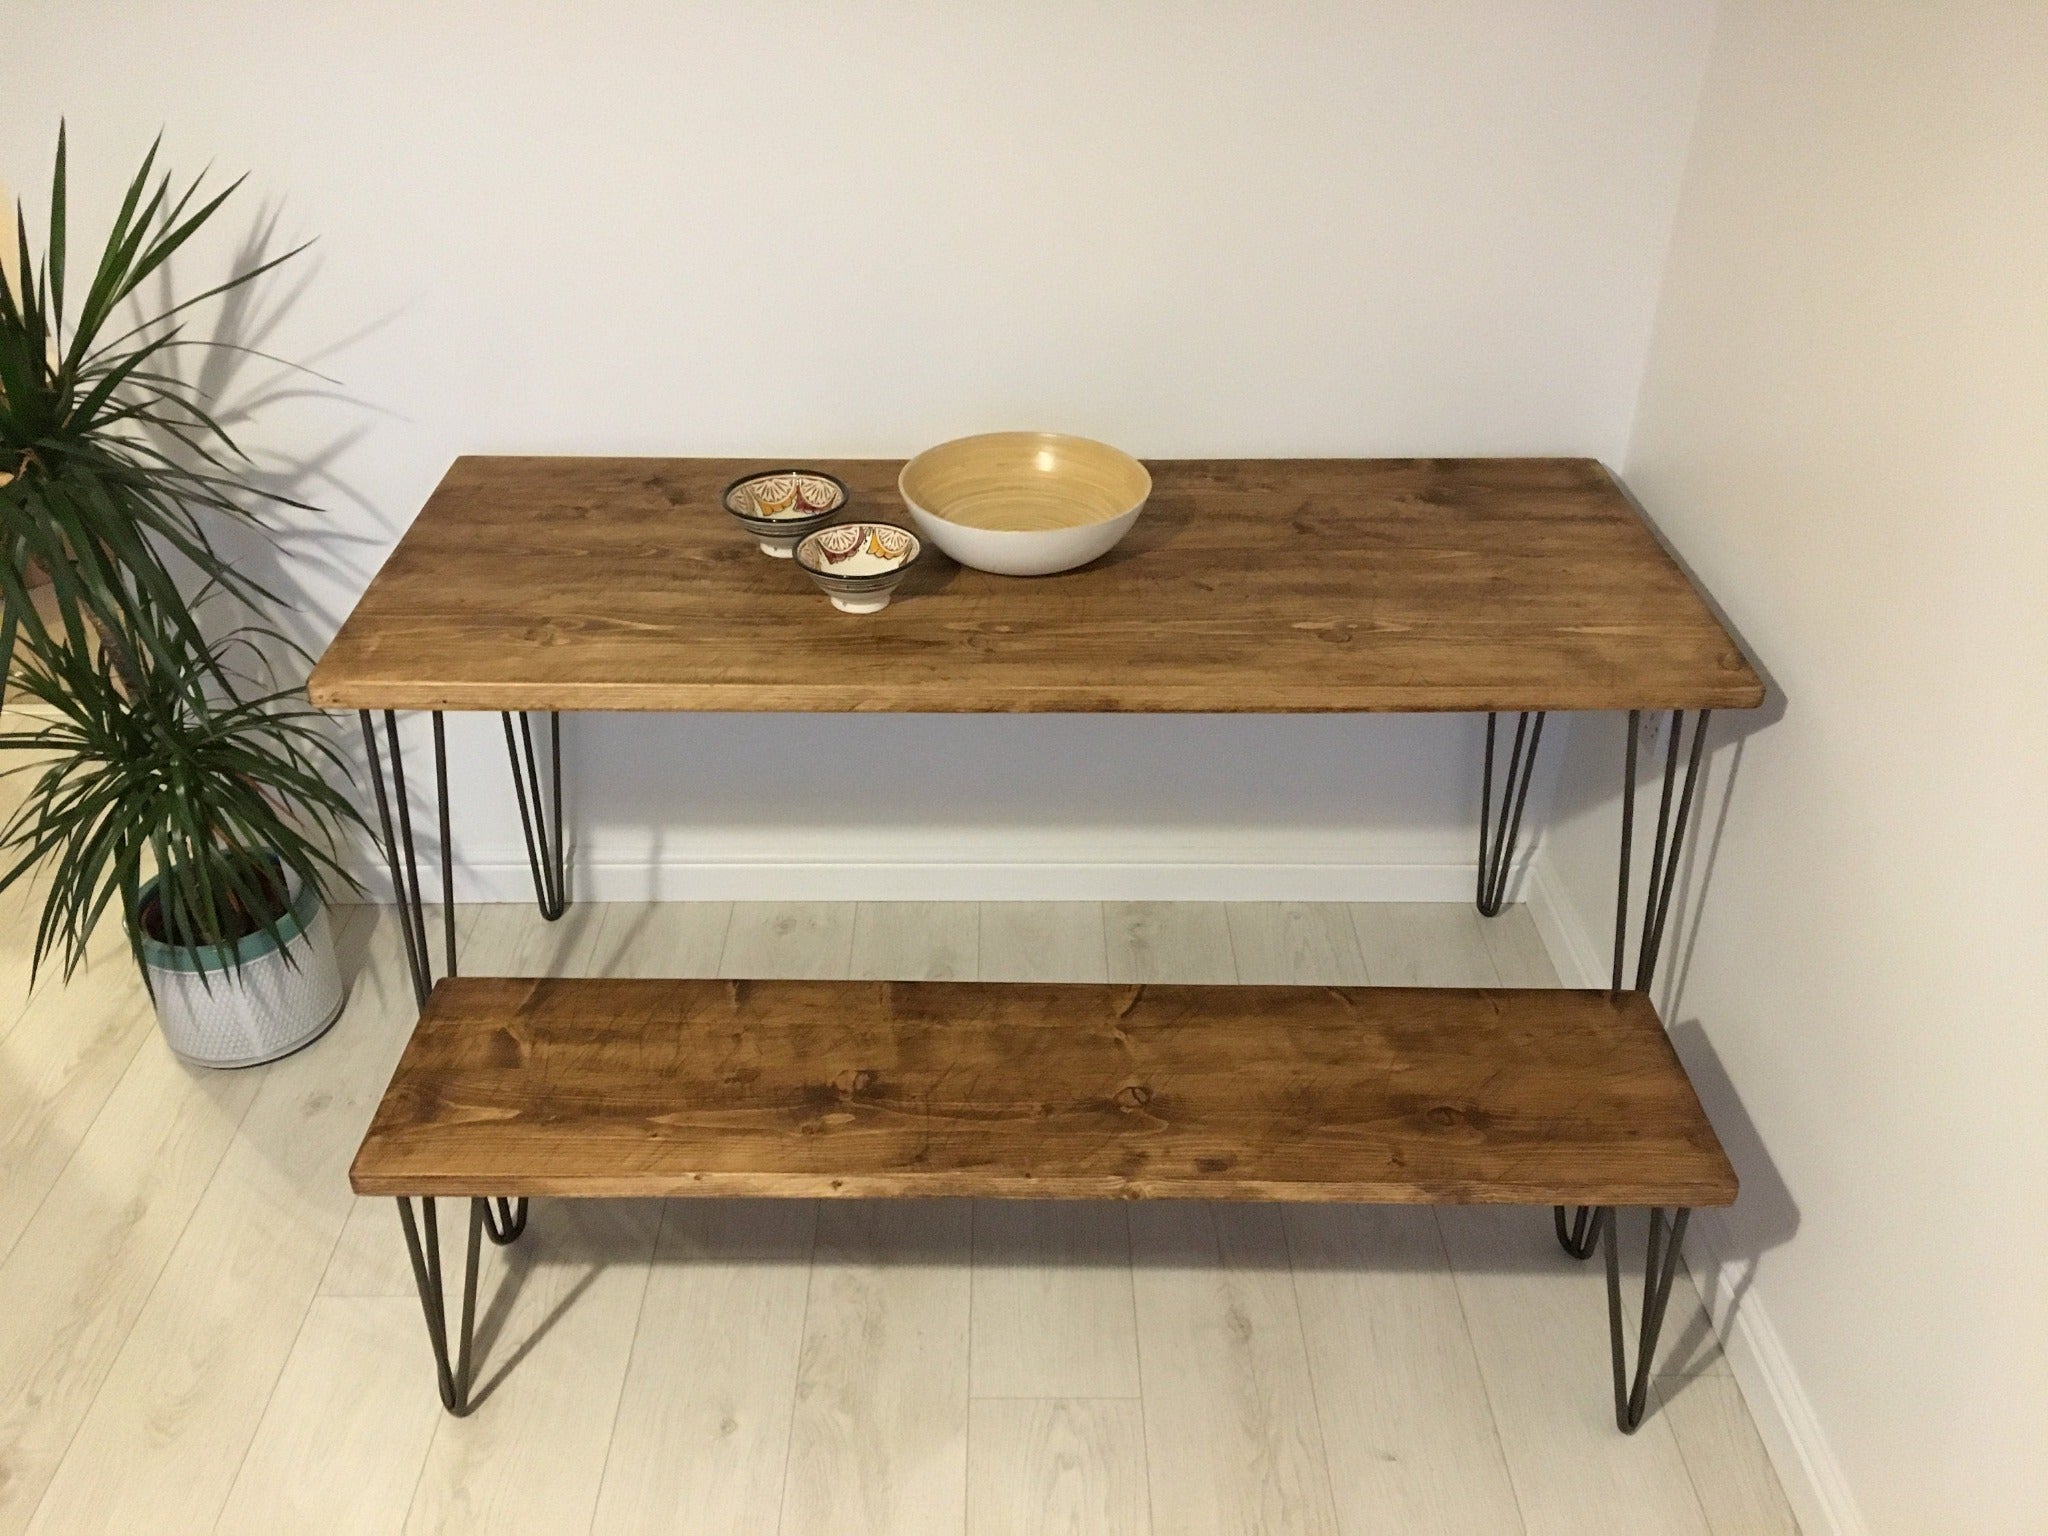 Rustic Reclaimed Wood Dining Table & Benches with Steel Hairpin Legs